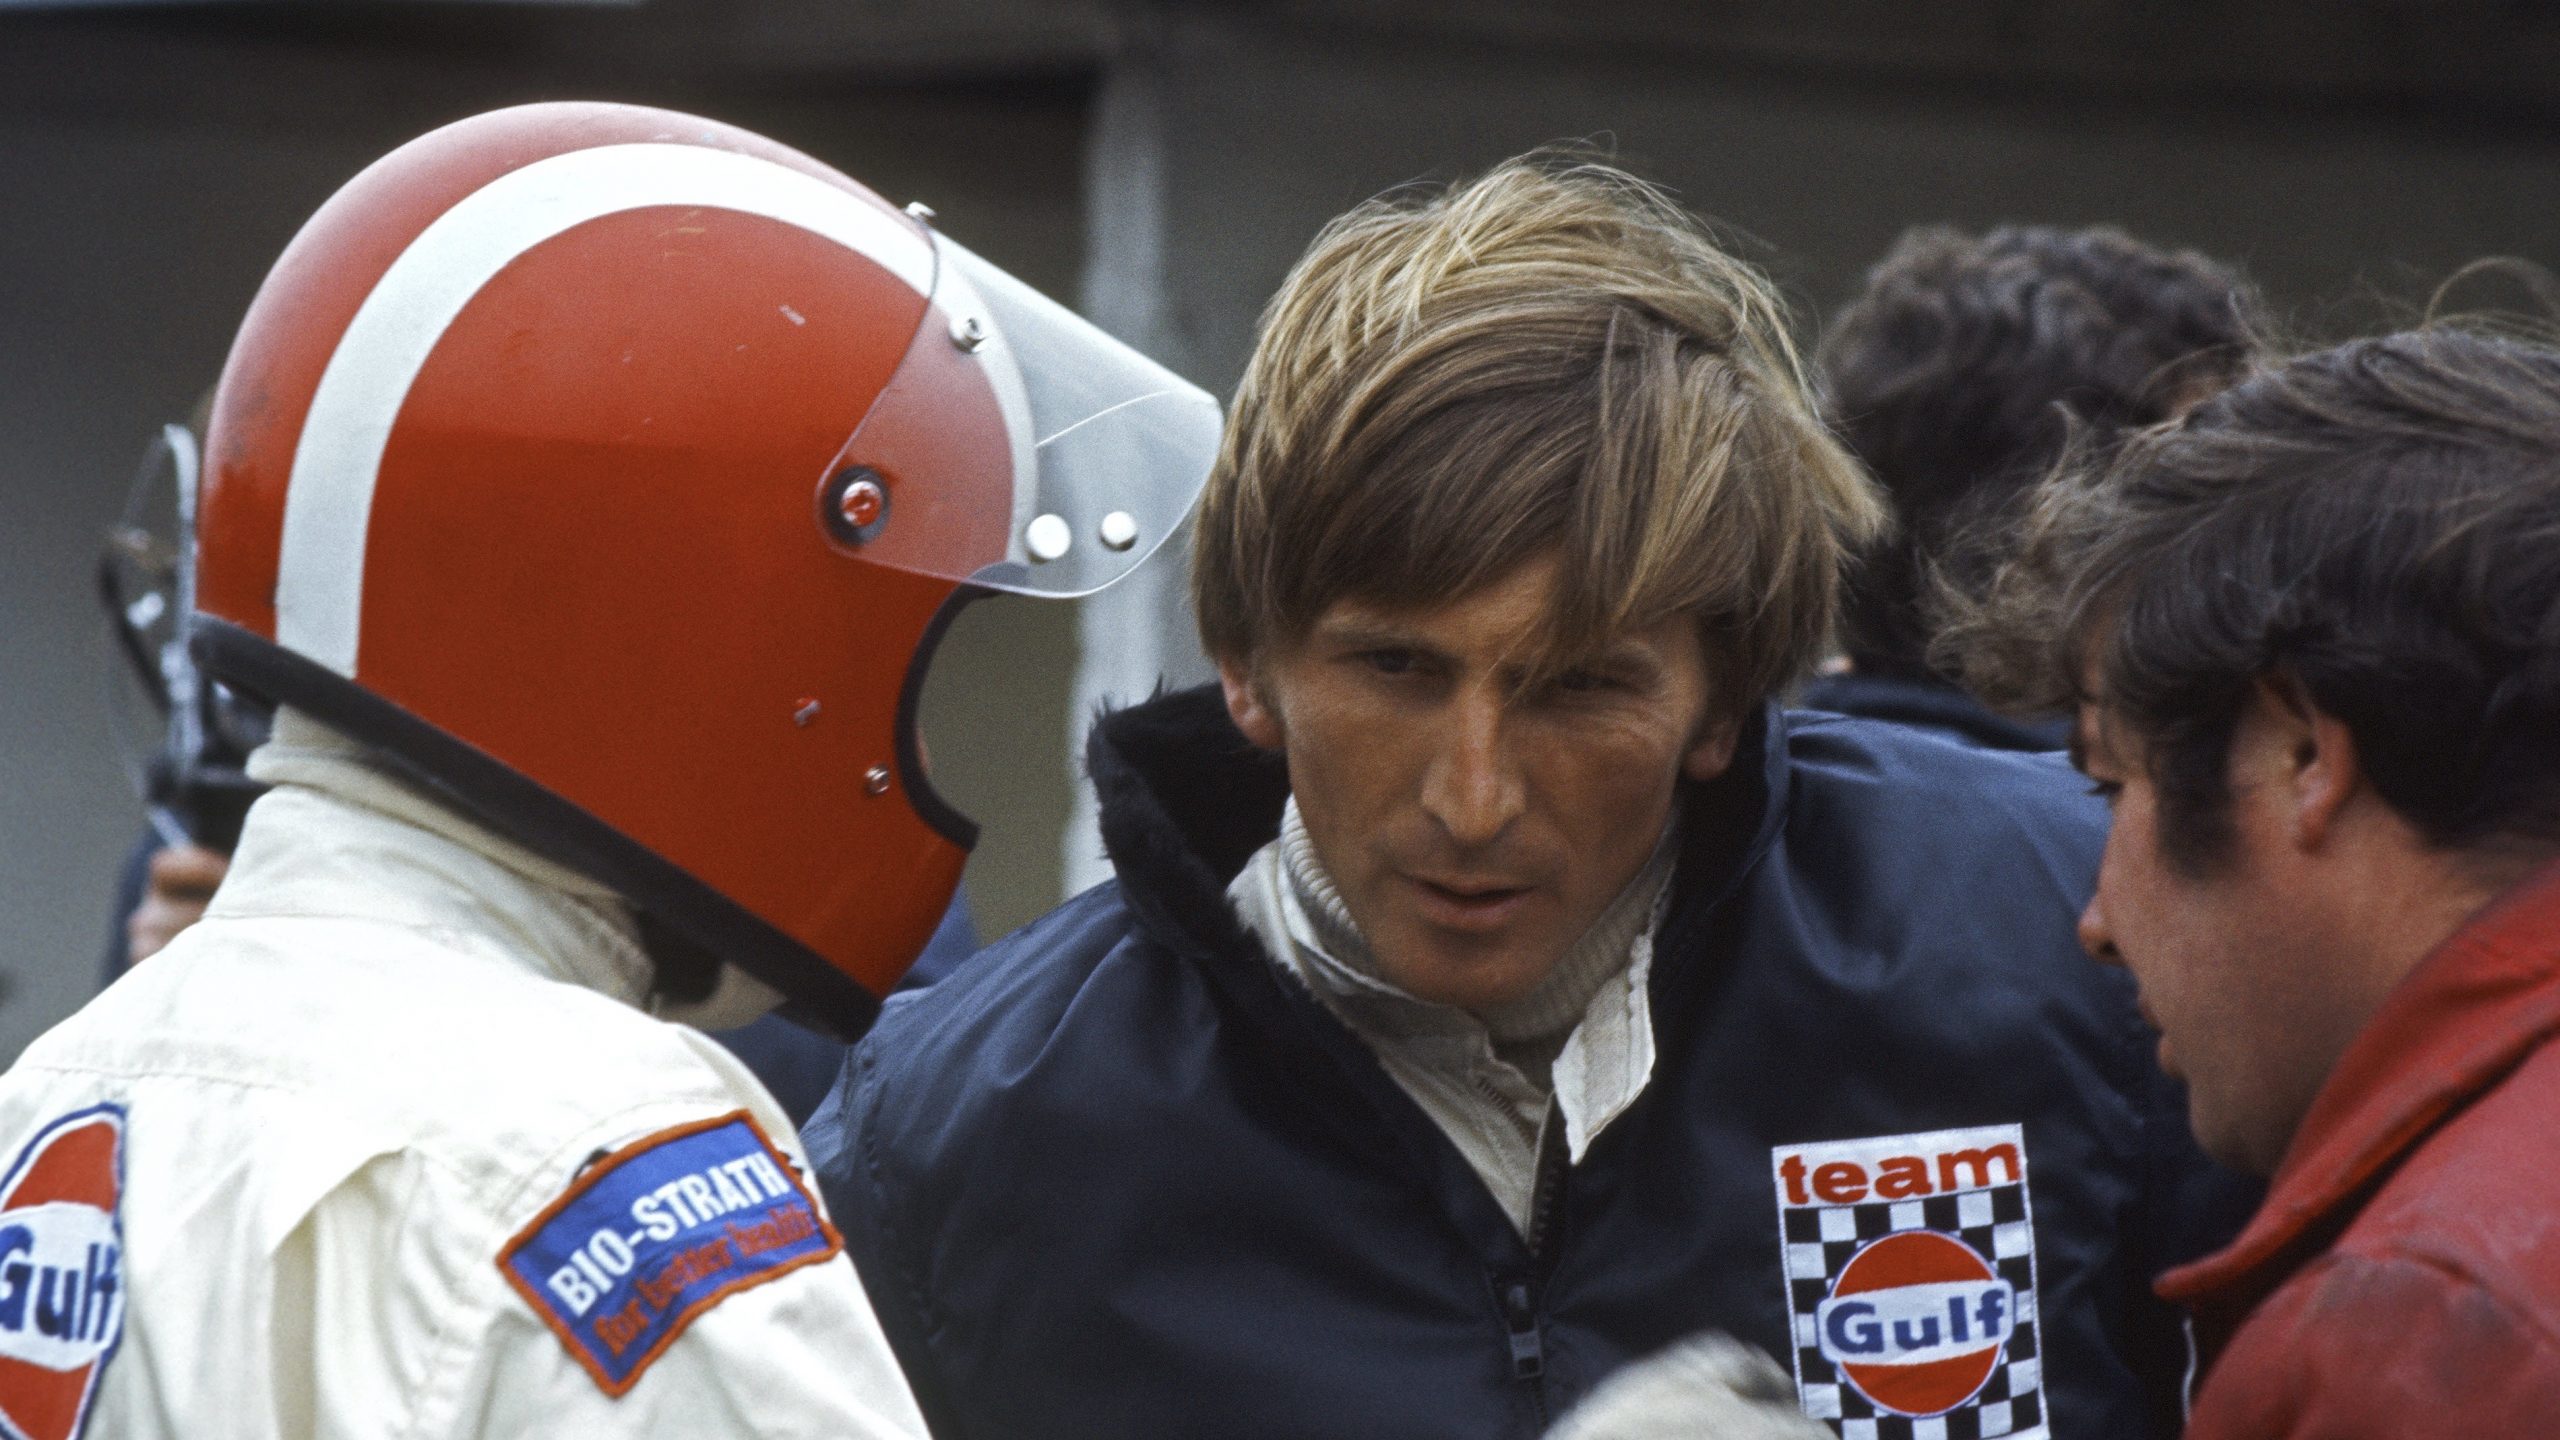 The One That Got Away: Why Derek Bell let go of the Ferrari of his dreams